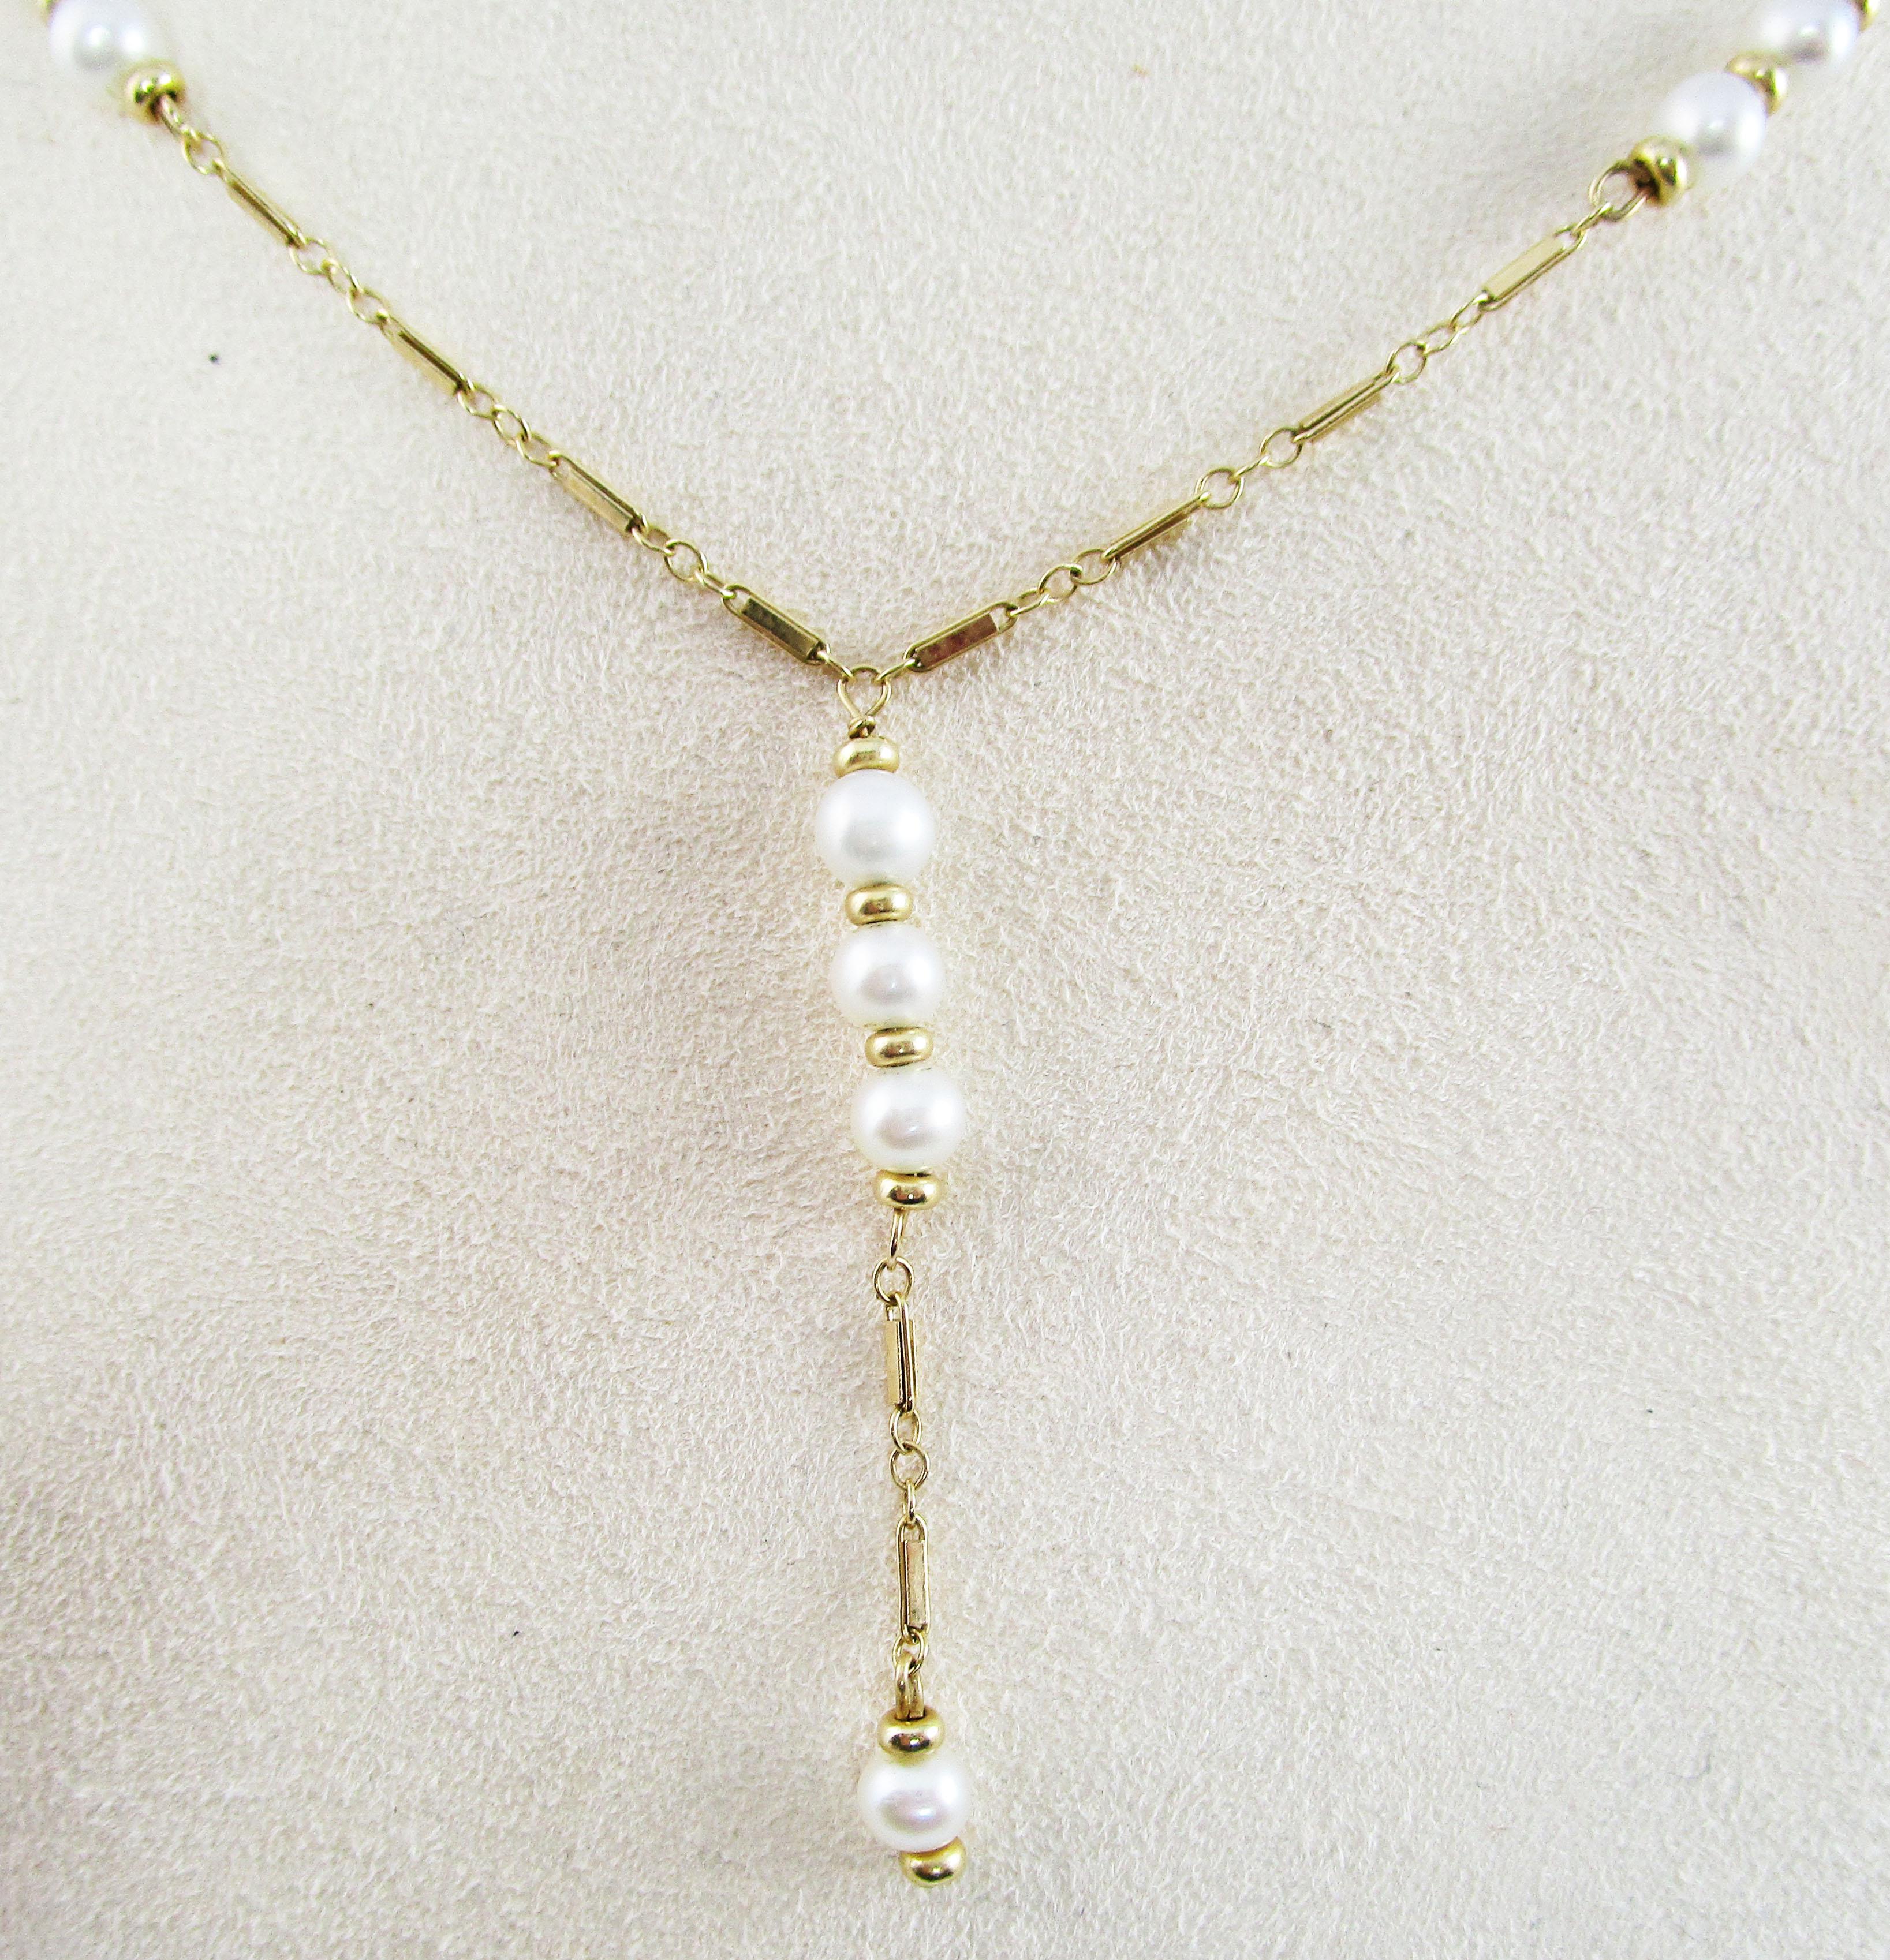 This is a magnificent lariat style necklace in 14k yellow gold featuring a gorgeous array of stunning white pearls. The silvery overtone and incredible luster of the pearls is the perfect complement for the warmth of the yellow gold. The pearls